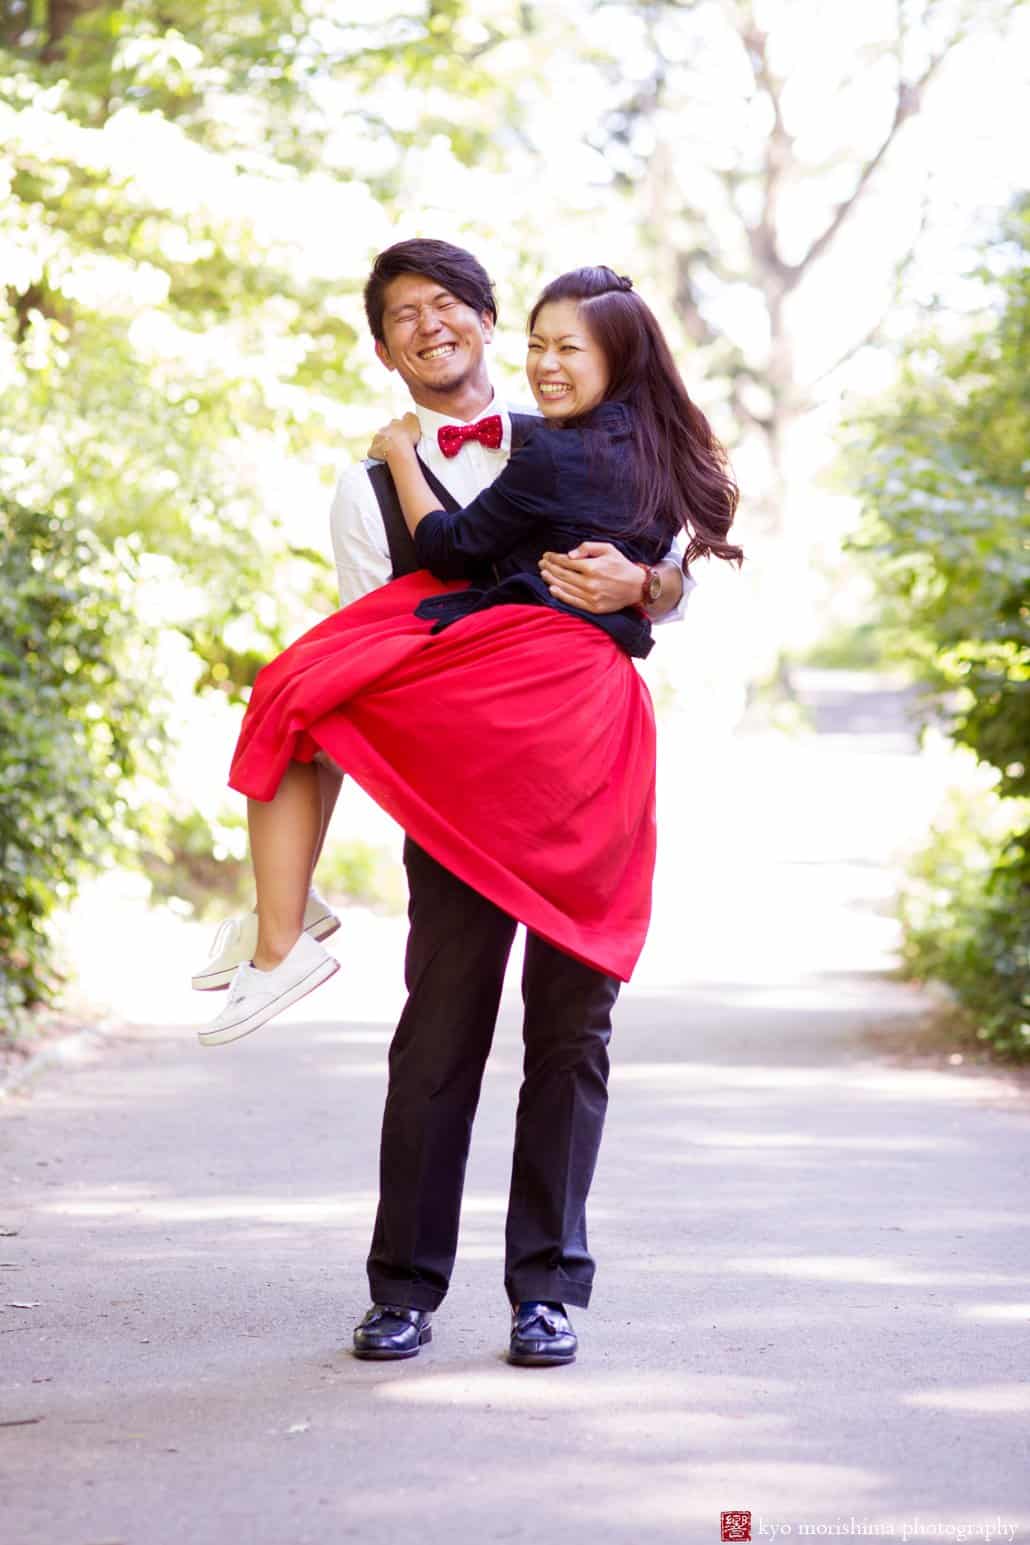 Japanese engagement photo in NYC's Central Park photographed by Kyo Morishima